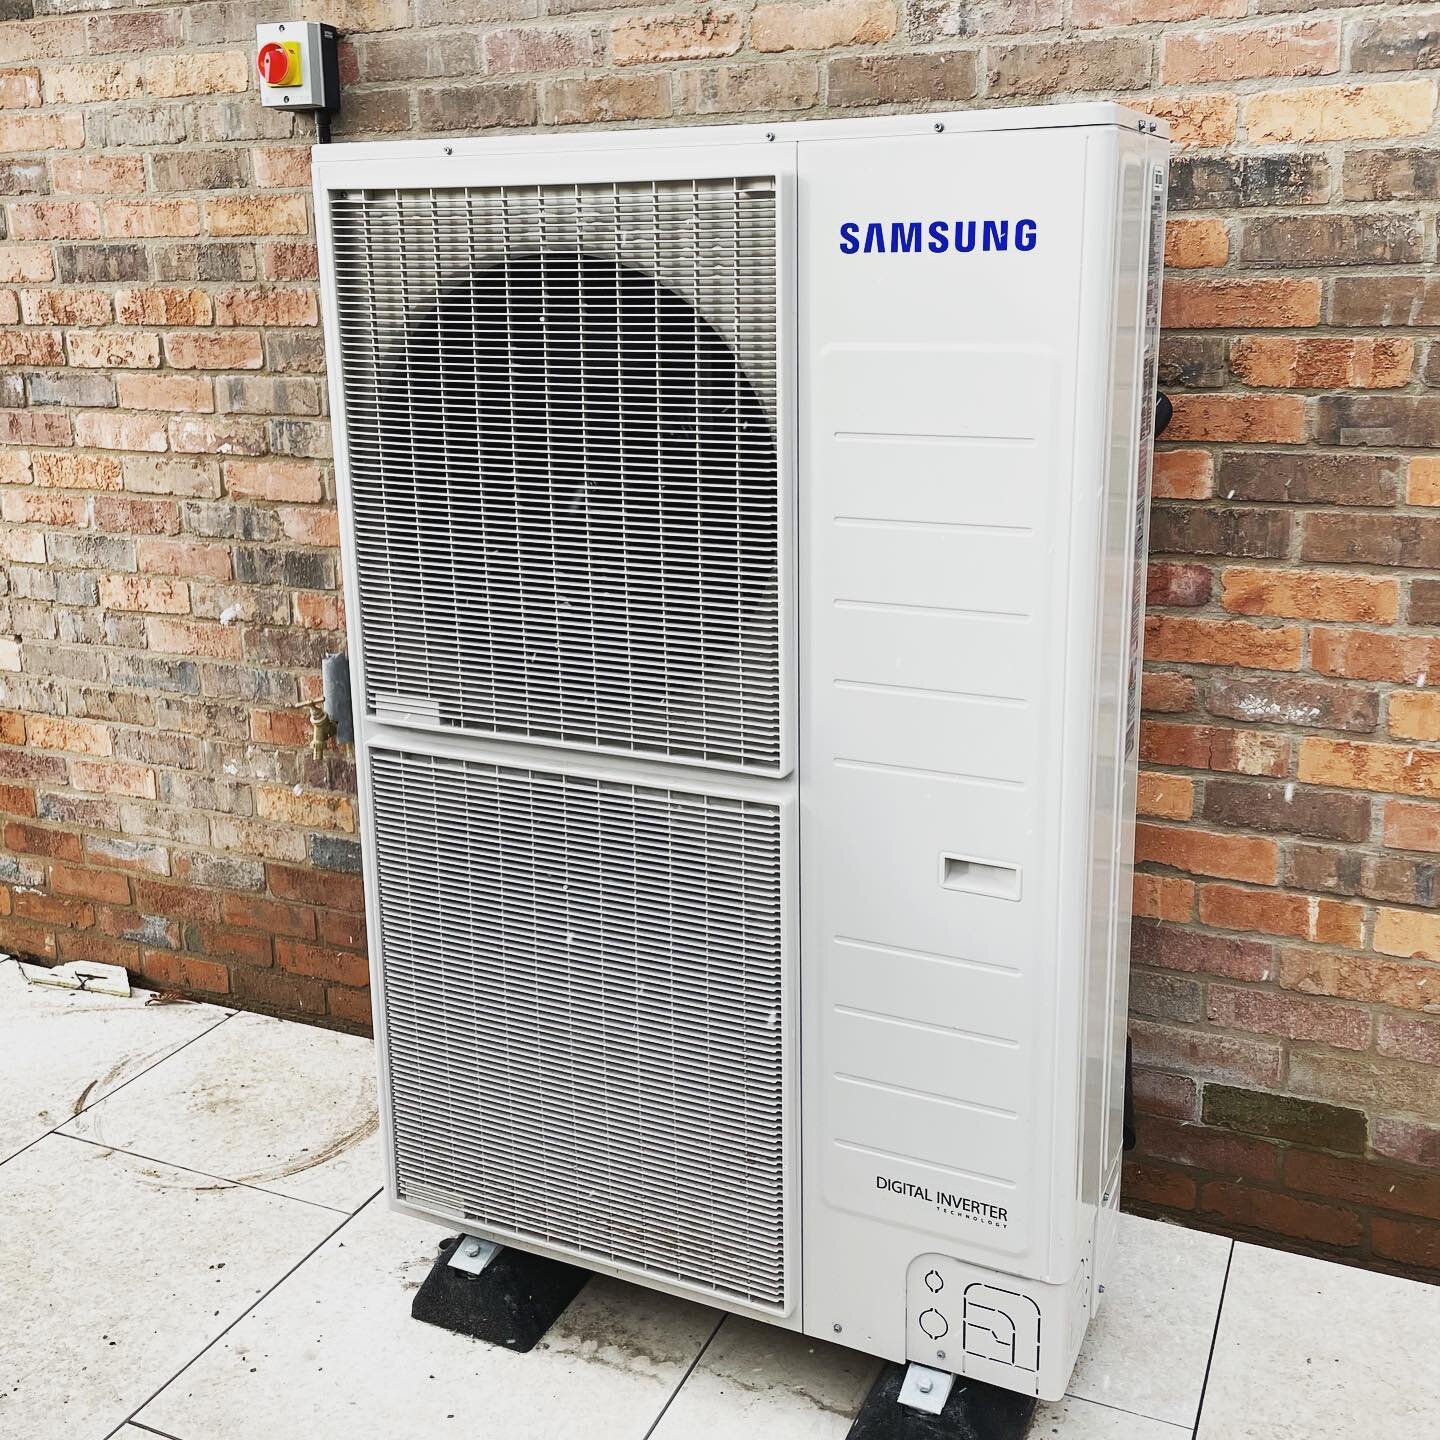 ♻️♻️♻️ A 16kw Samsung air source heat pump fitted on a large 5 bed new build home. Really impressed with this Samsung unit having only fitted Mitsubishi previously. 

Due to supply issues we had to use Samsung and it&rsquo;s fair to say it won&rsquo;